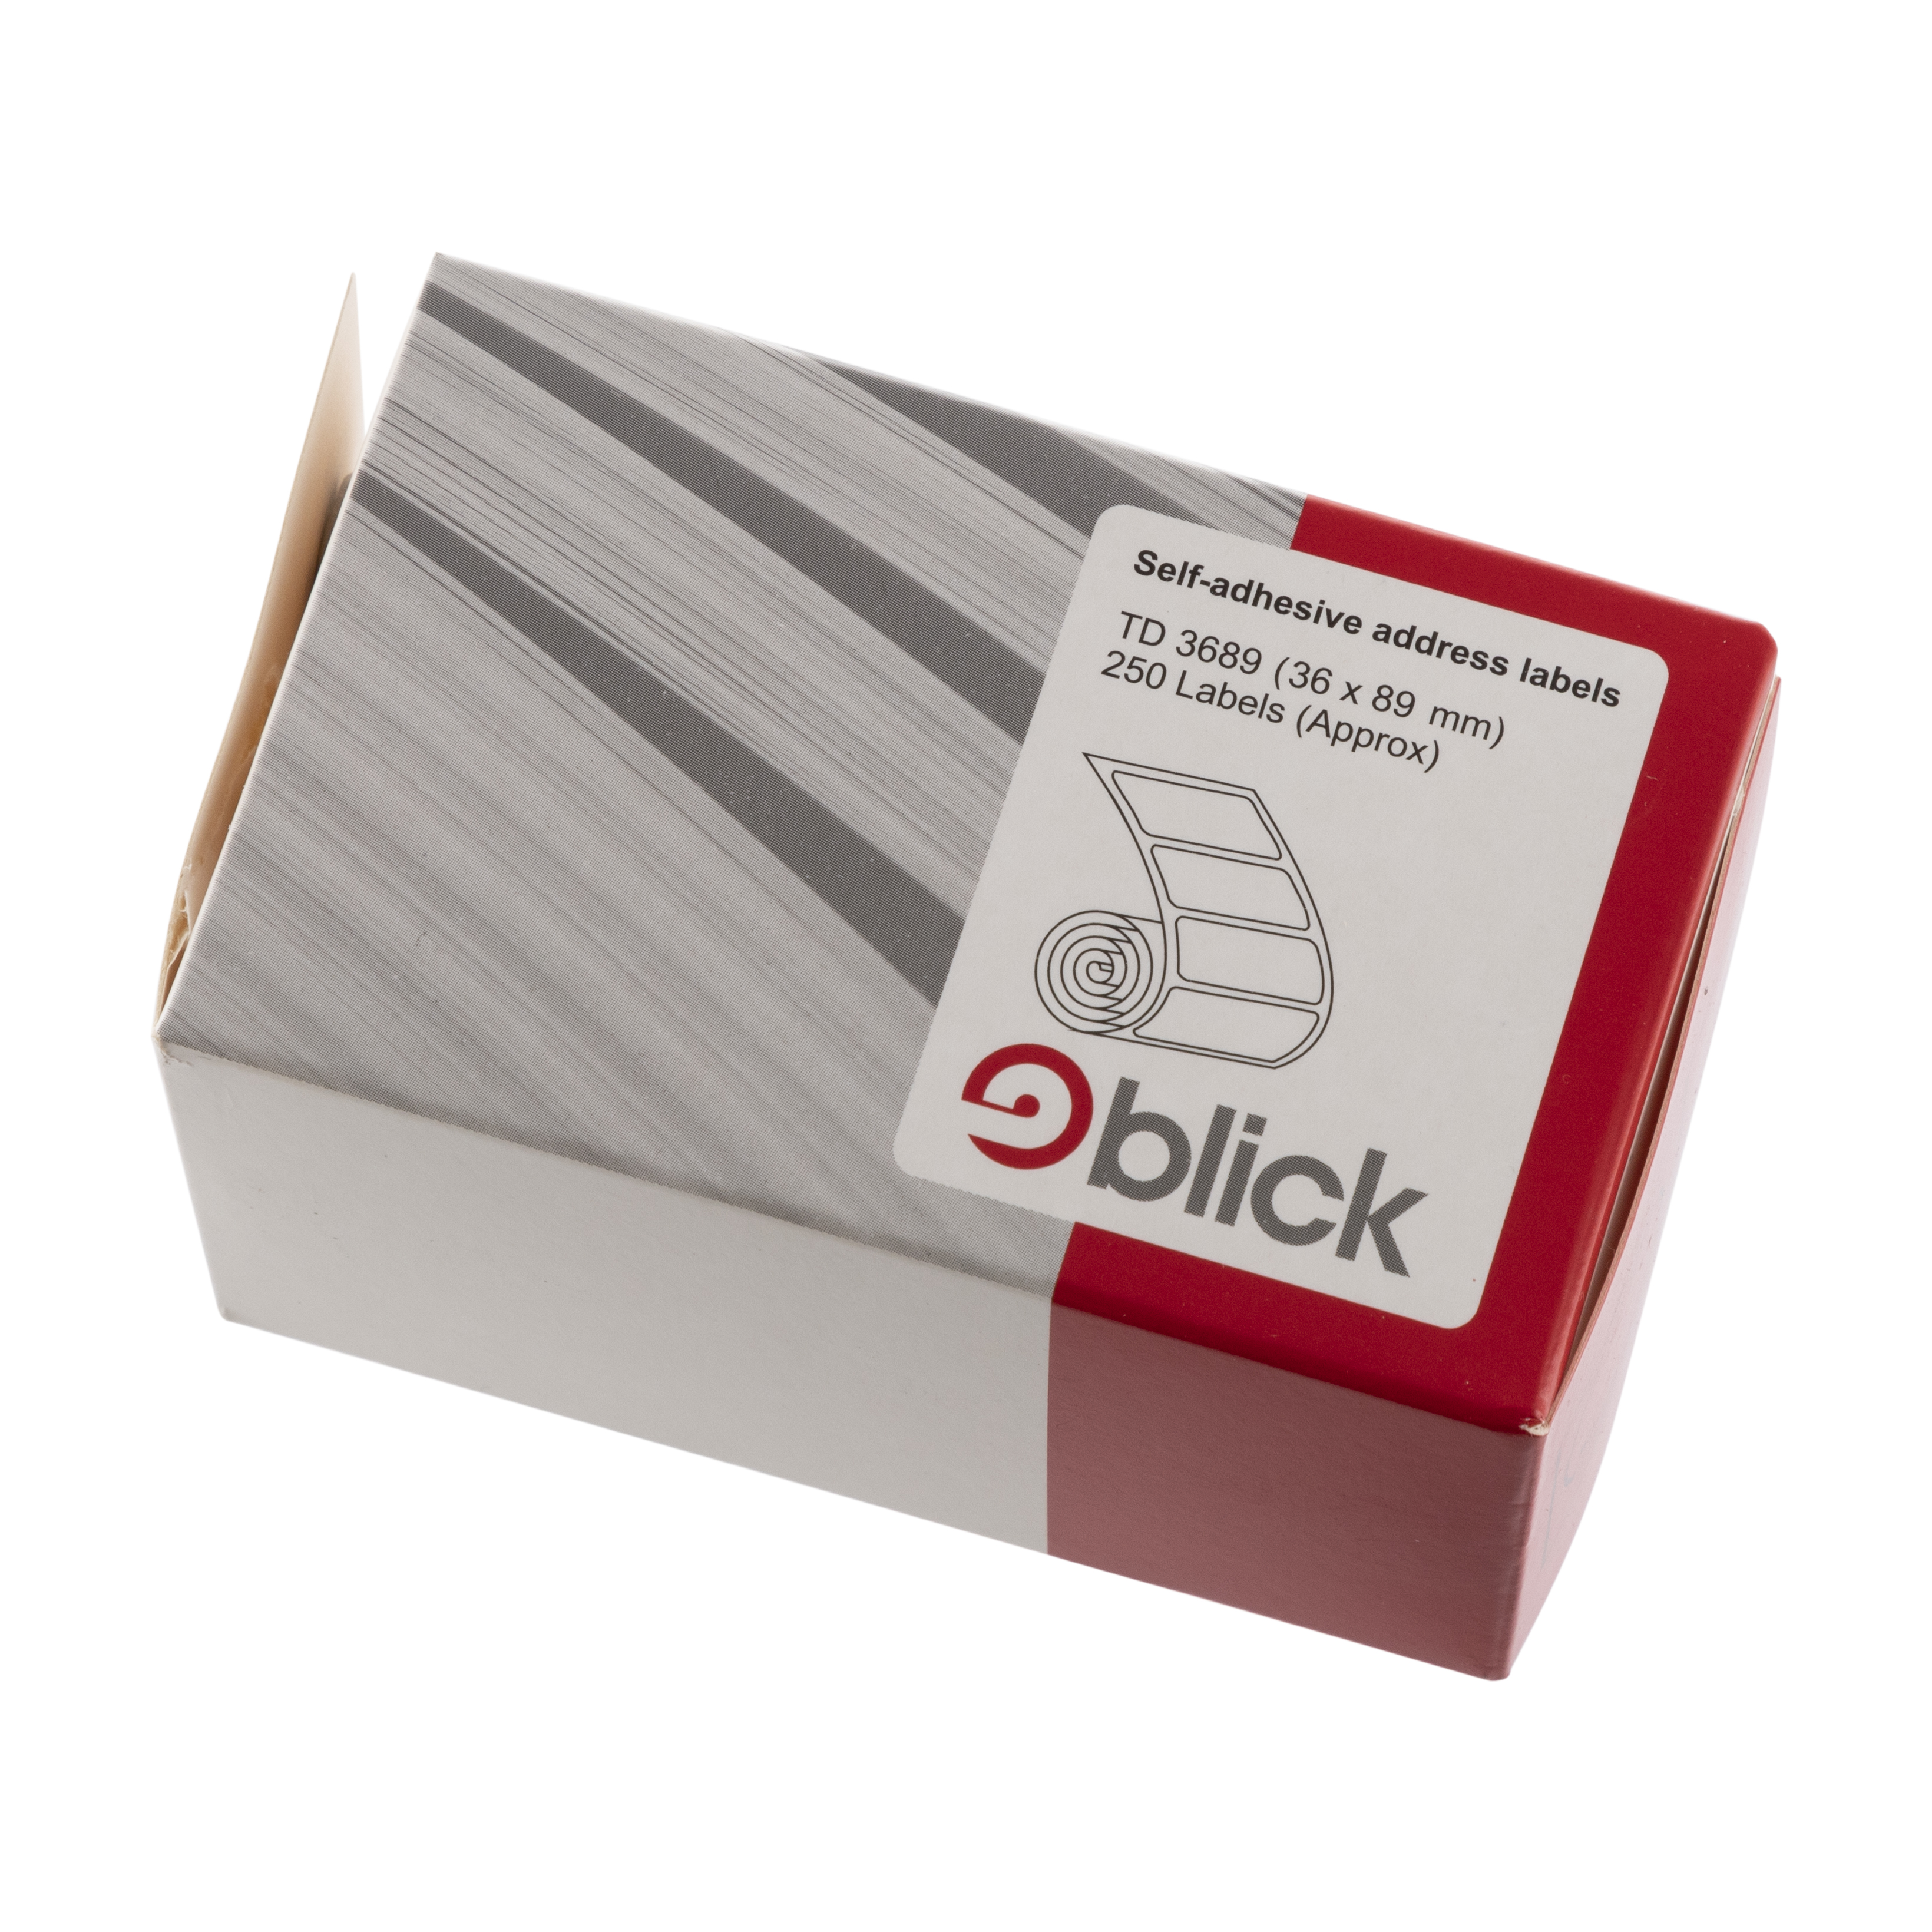 Sticky Address Labels On a Roll 250 Self Adhesive Premium Quality 89mm X 36mm 